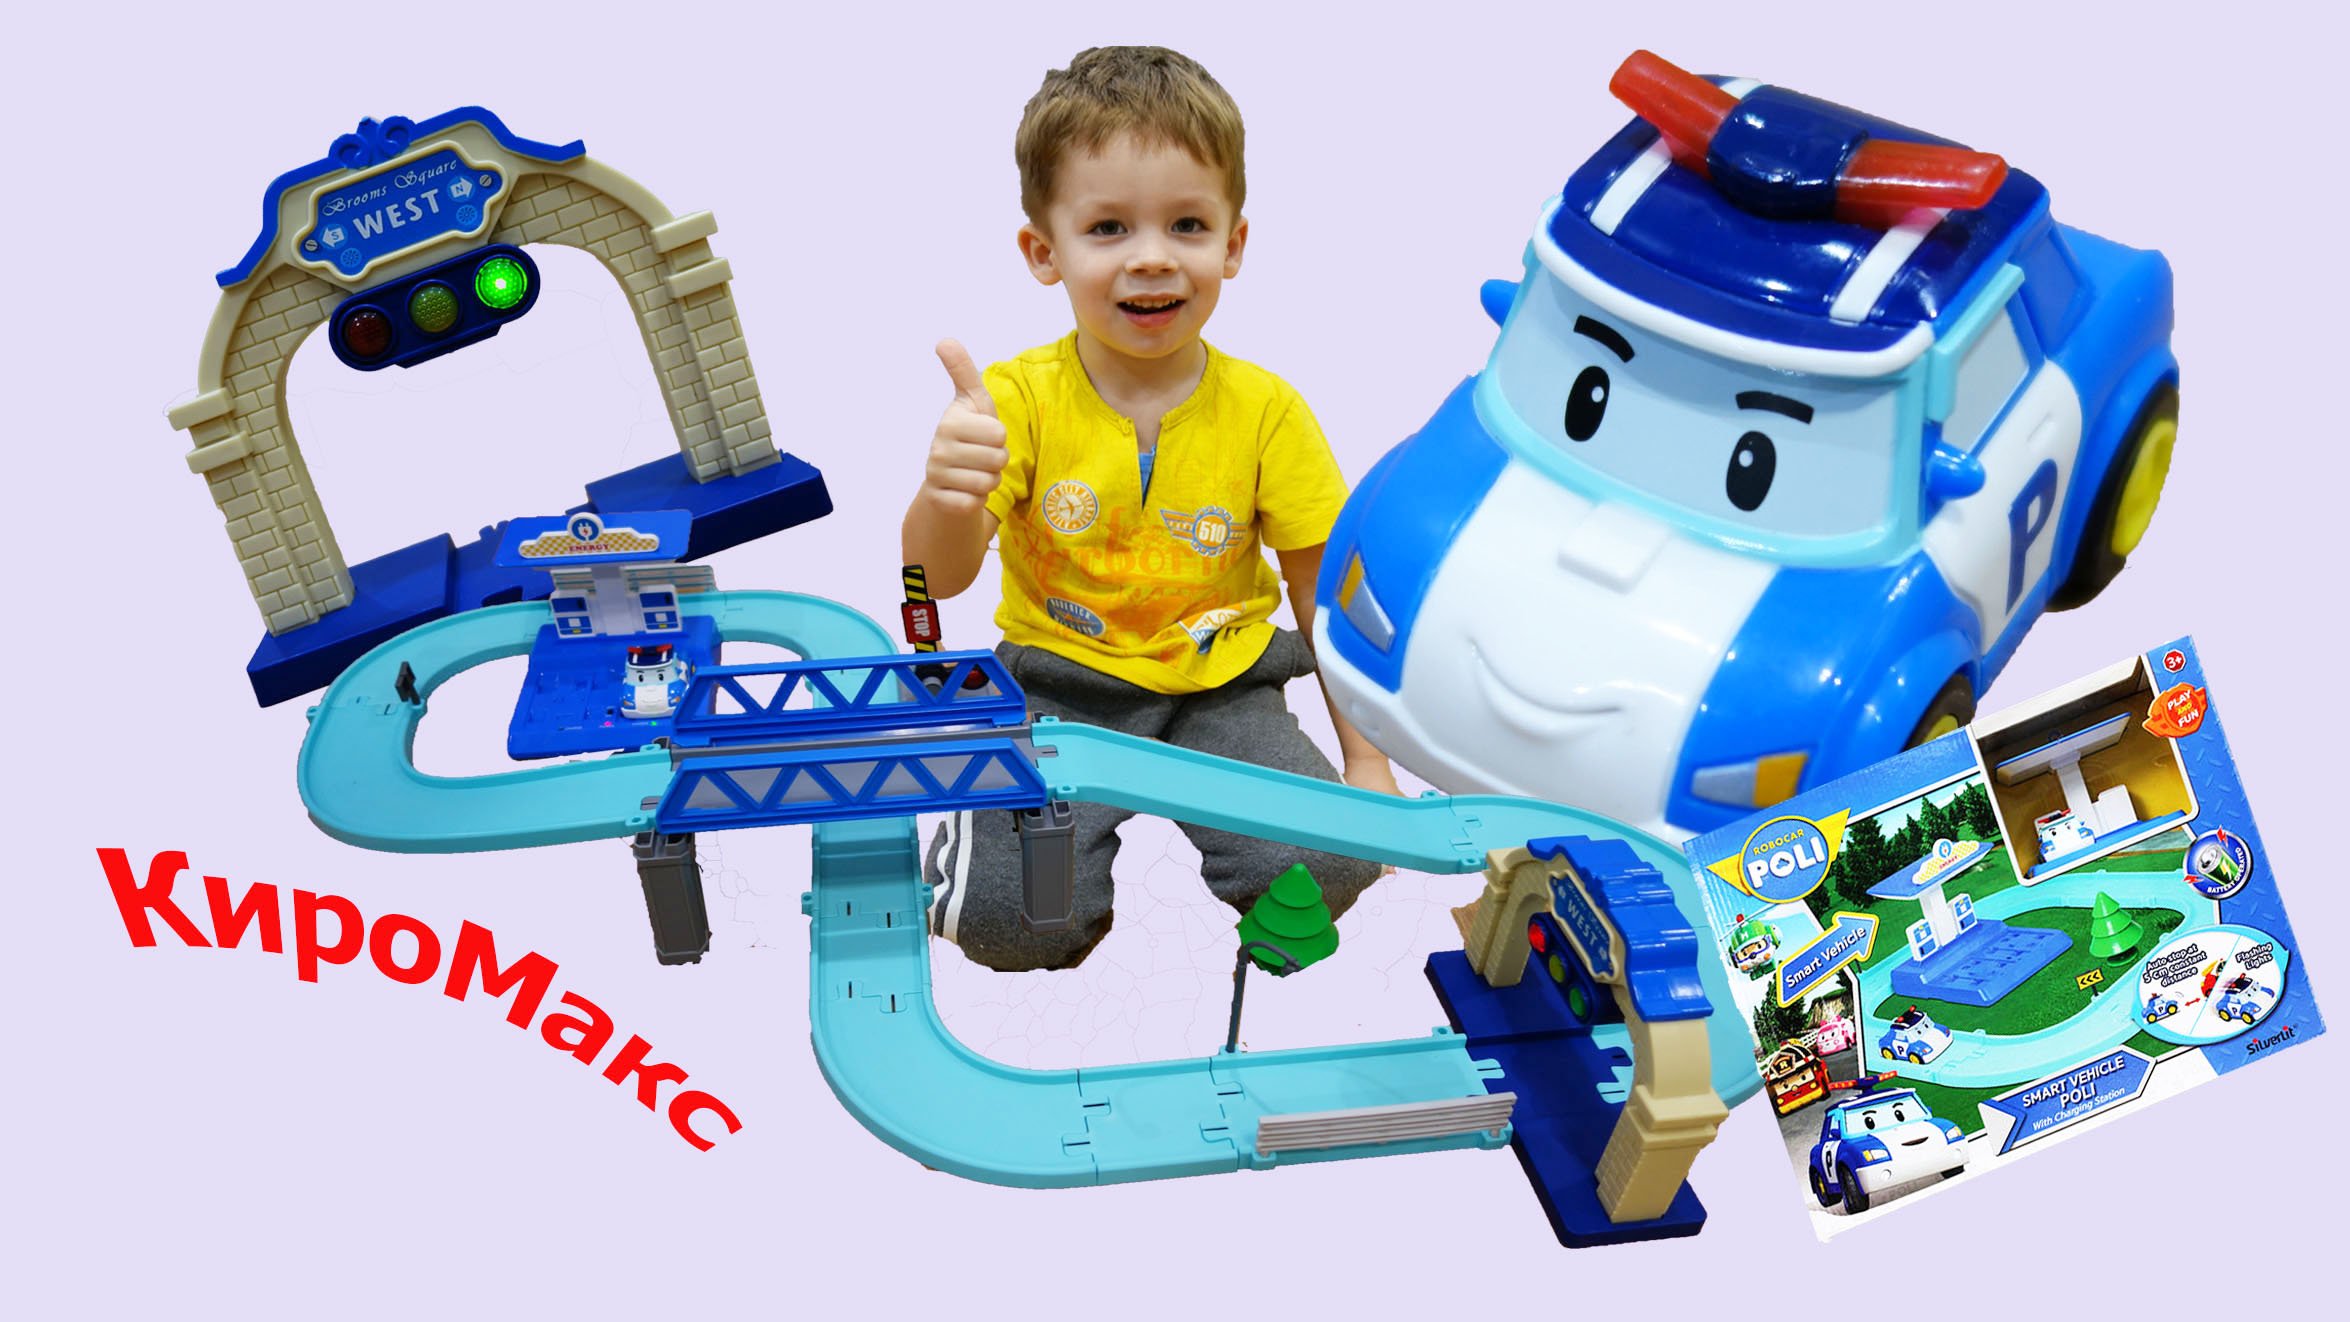 Ask Yourself This: Will Robocar Poli Toys Delight Your Kids This Year